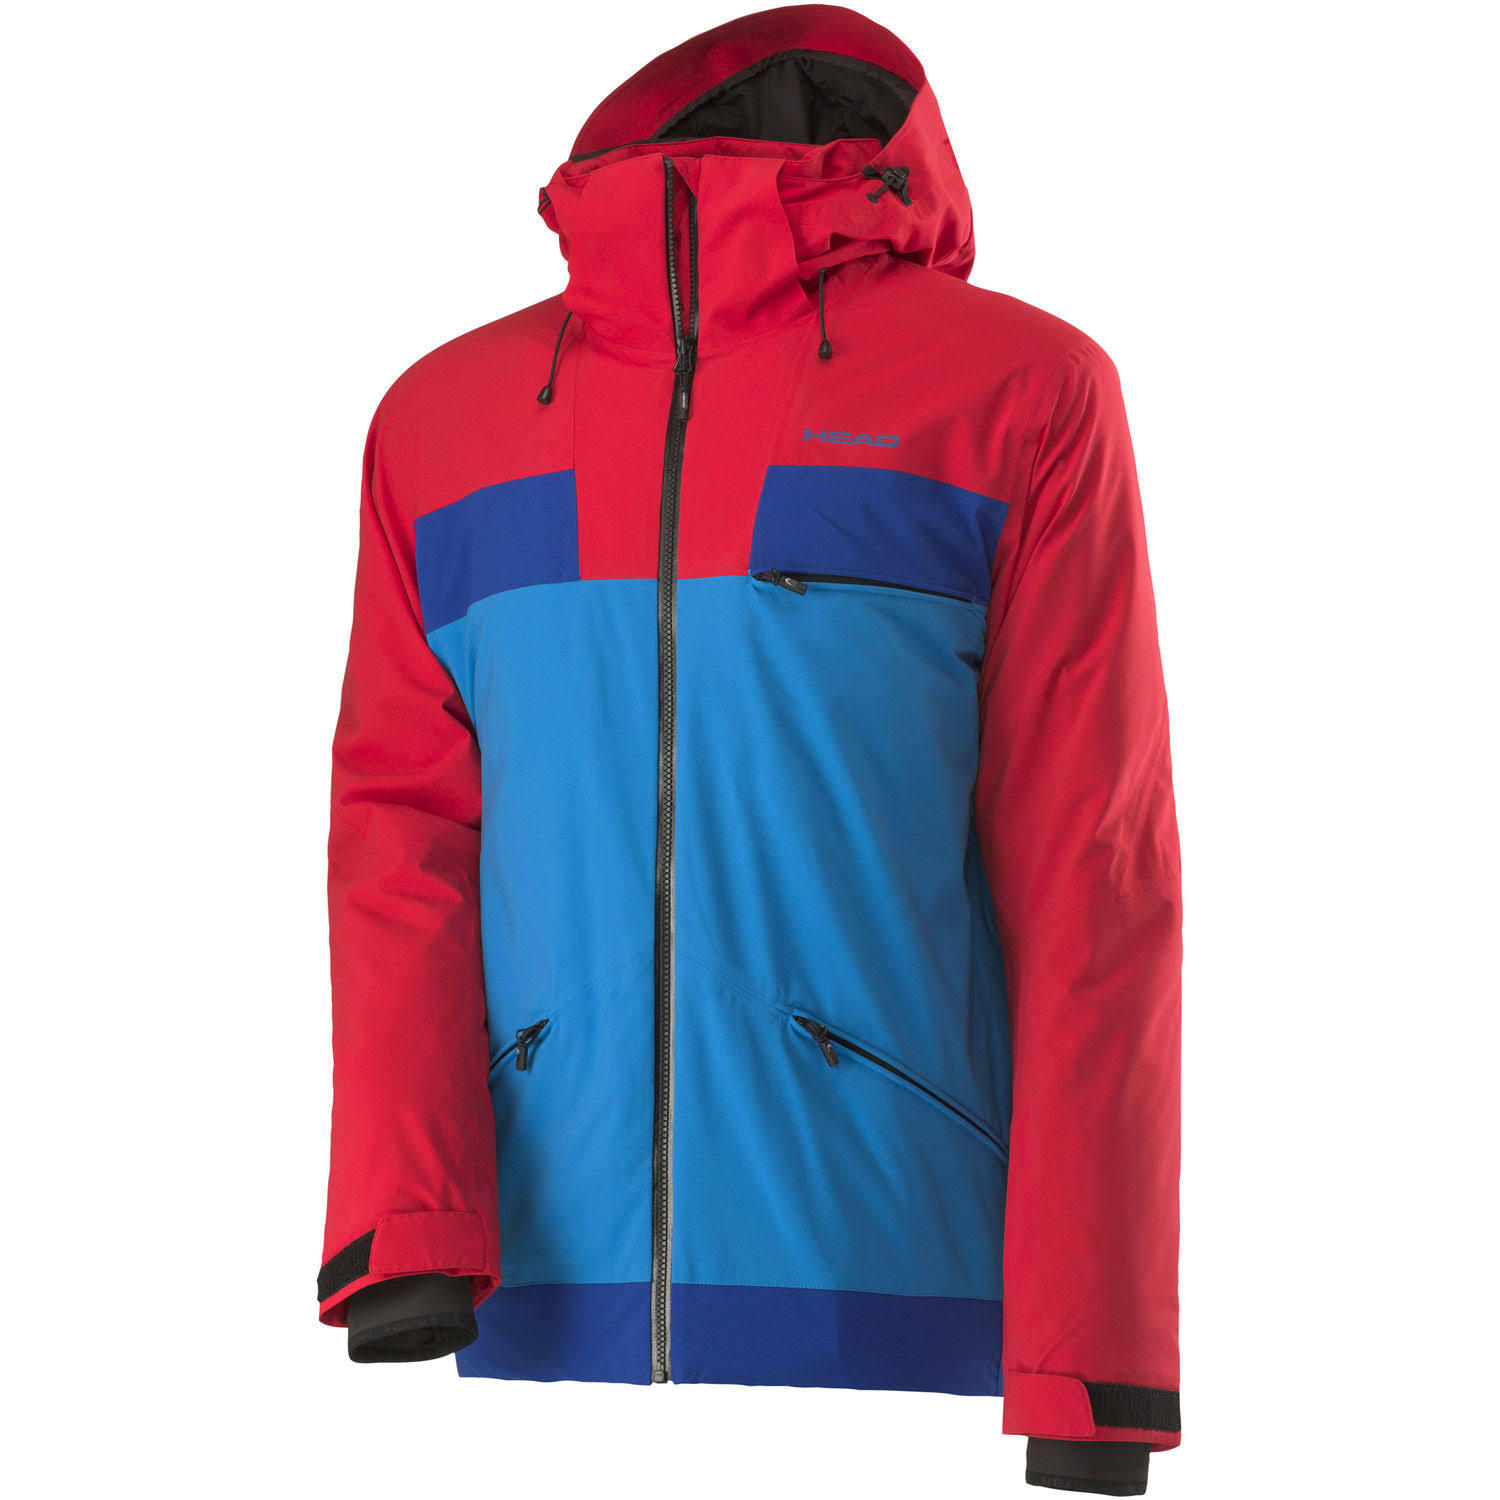 Head 2L INSULATED Jacket Men, Red/lagoon, M